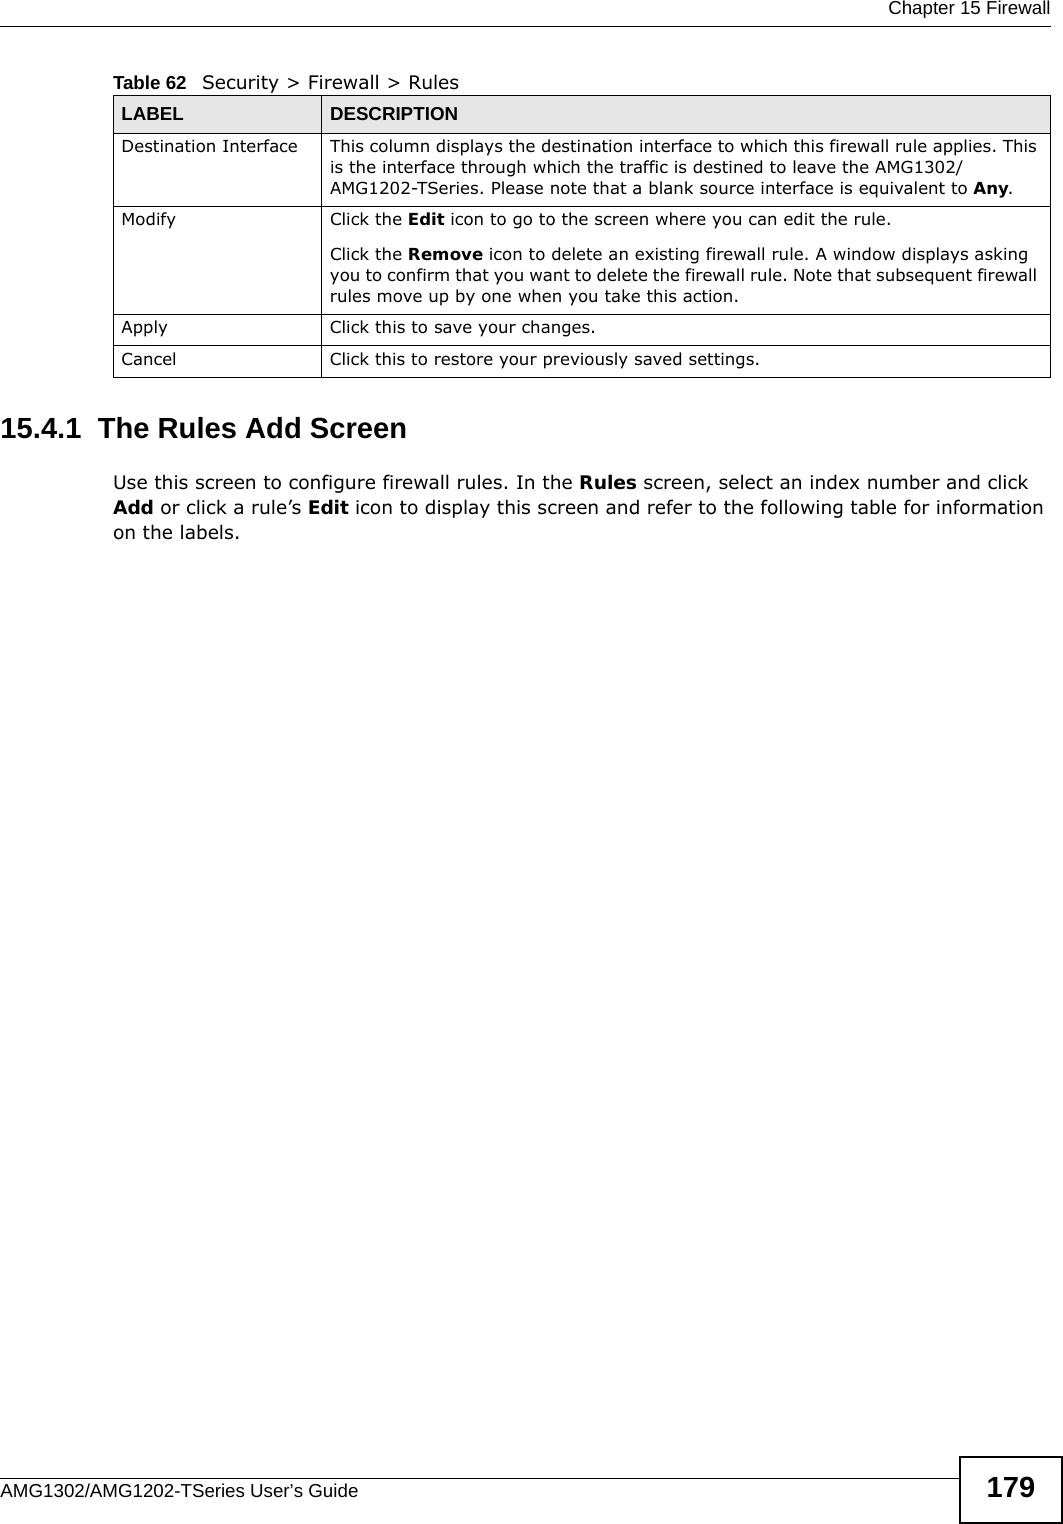  Chapter 15 FirewallAMG1302/AMG1202-TSeries User’s Guide 17915.4.1  The Rules Add ScreenUse this screen to configure firewall rules. In the Rules screen, select an index number and click Add or click a rule’s Edit icon to display this screen and refer to the following table for information on the labels.Destination Interface This column displays the destination interface to which this firewall rule applies. This is the interface through which the traffic is destined to leave the AMG1302/AMG1202-TSeries. Please note that a blank source interface is equivalent to Any.Modify Click the Edit icon to go to the screen where you can edit the rule.Click the Remove icon to delete an existing firewall rule. A window displays asking you to confirm that you want to delete the firewall rule. Note that subsequent firewall rules move up by one when you take this action.Apply Click this to save your changes.Cancel Click this to restore your previously saved settings.Table 62   Security &gt; Firewall &gt; RulesLABEL DESCRIPTION